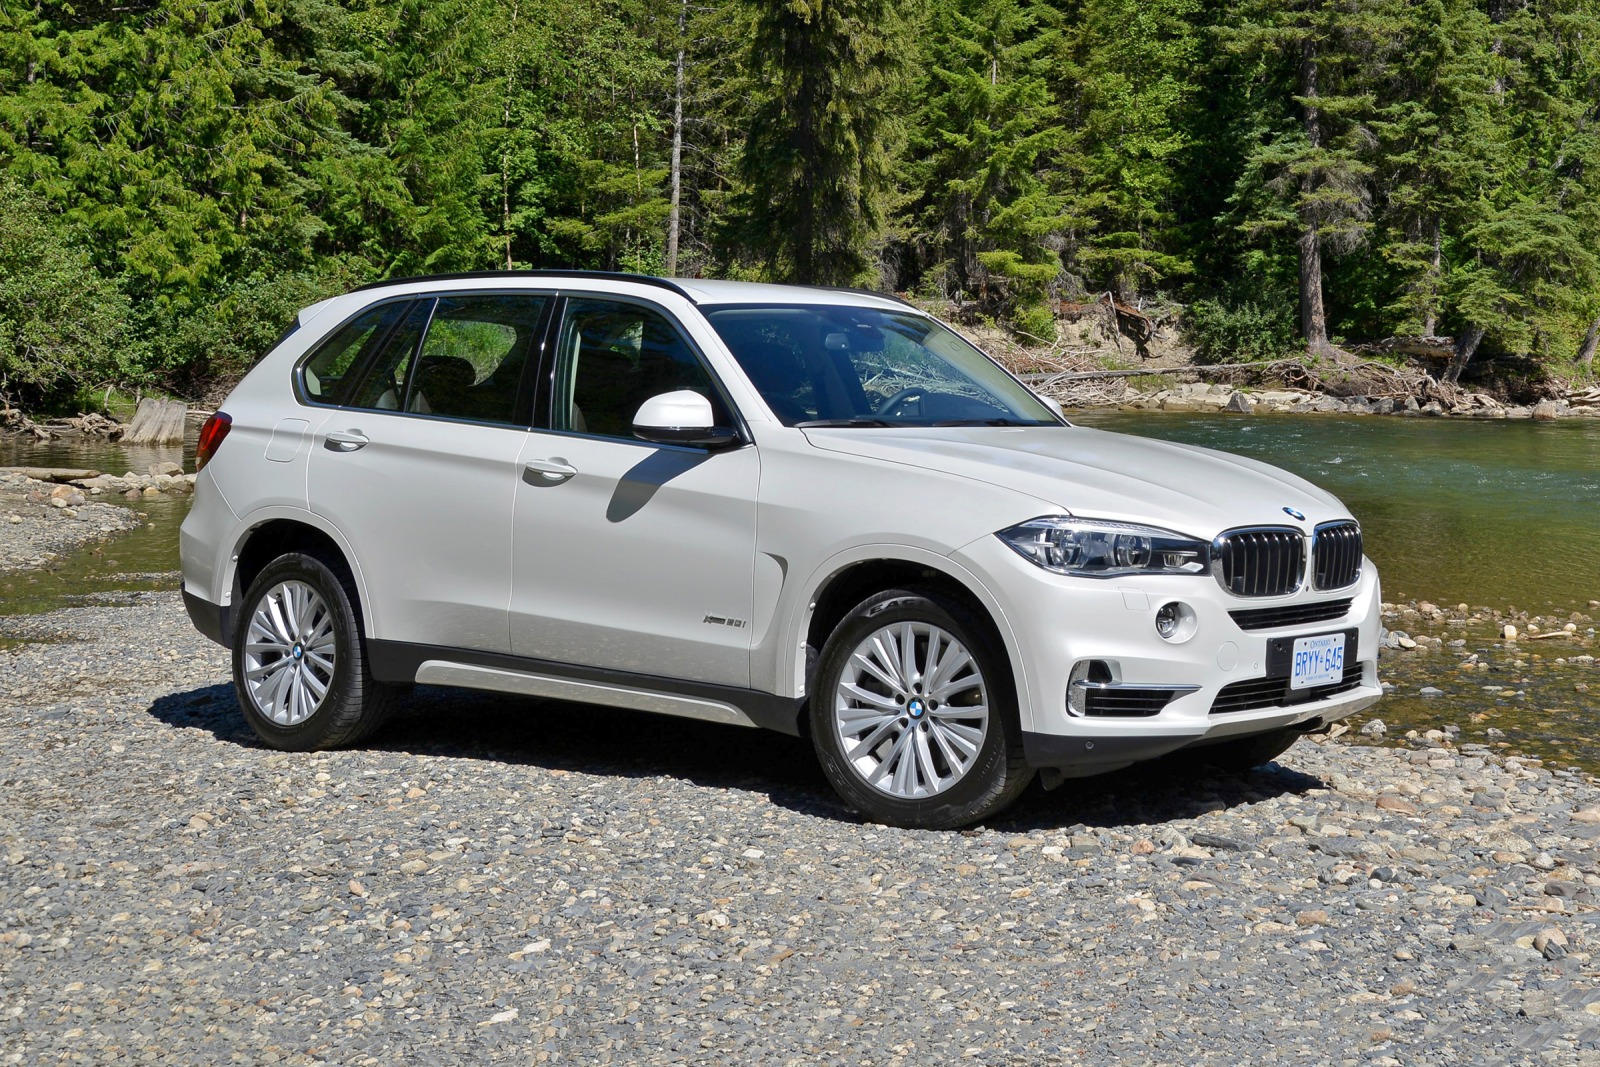 Mark down Imperial Preference 2018 BMW X5 Review | X5 SUV Models | CarBuzz